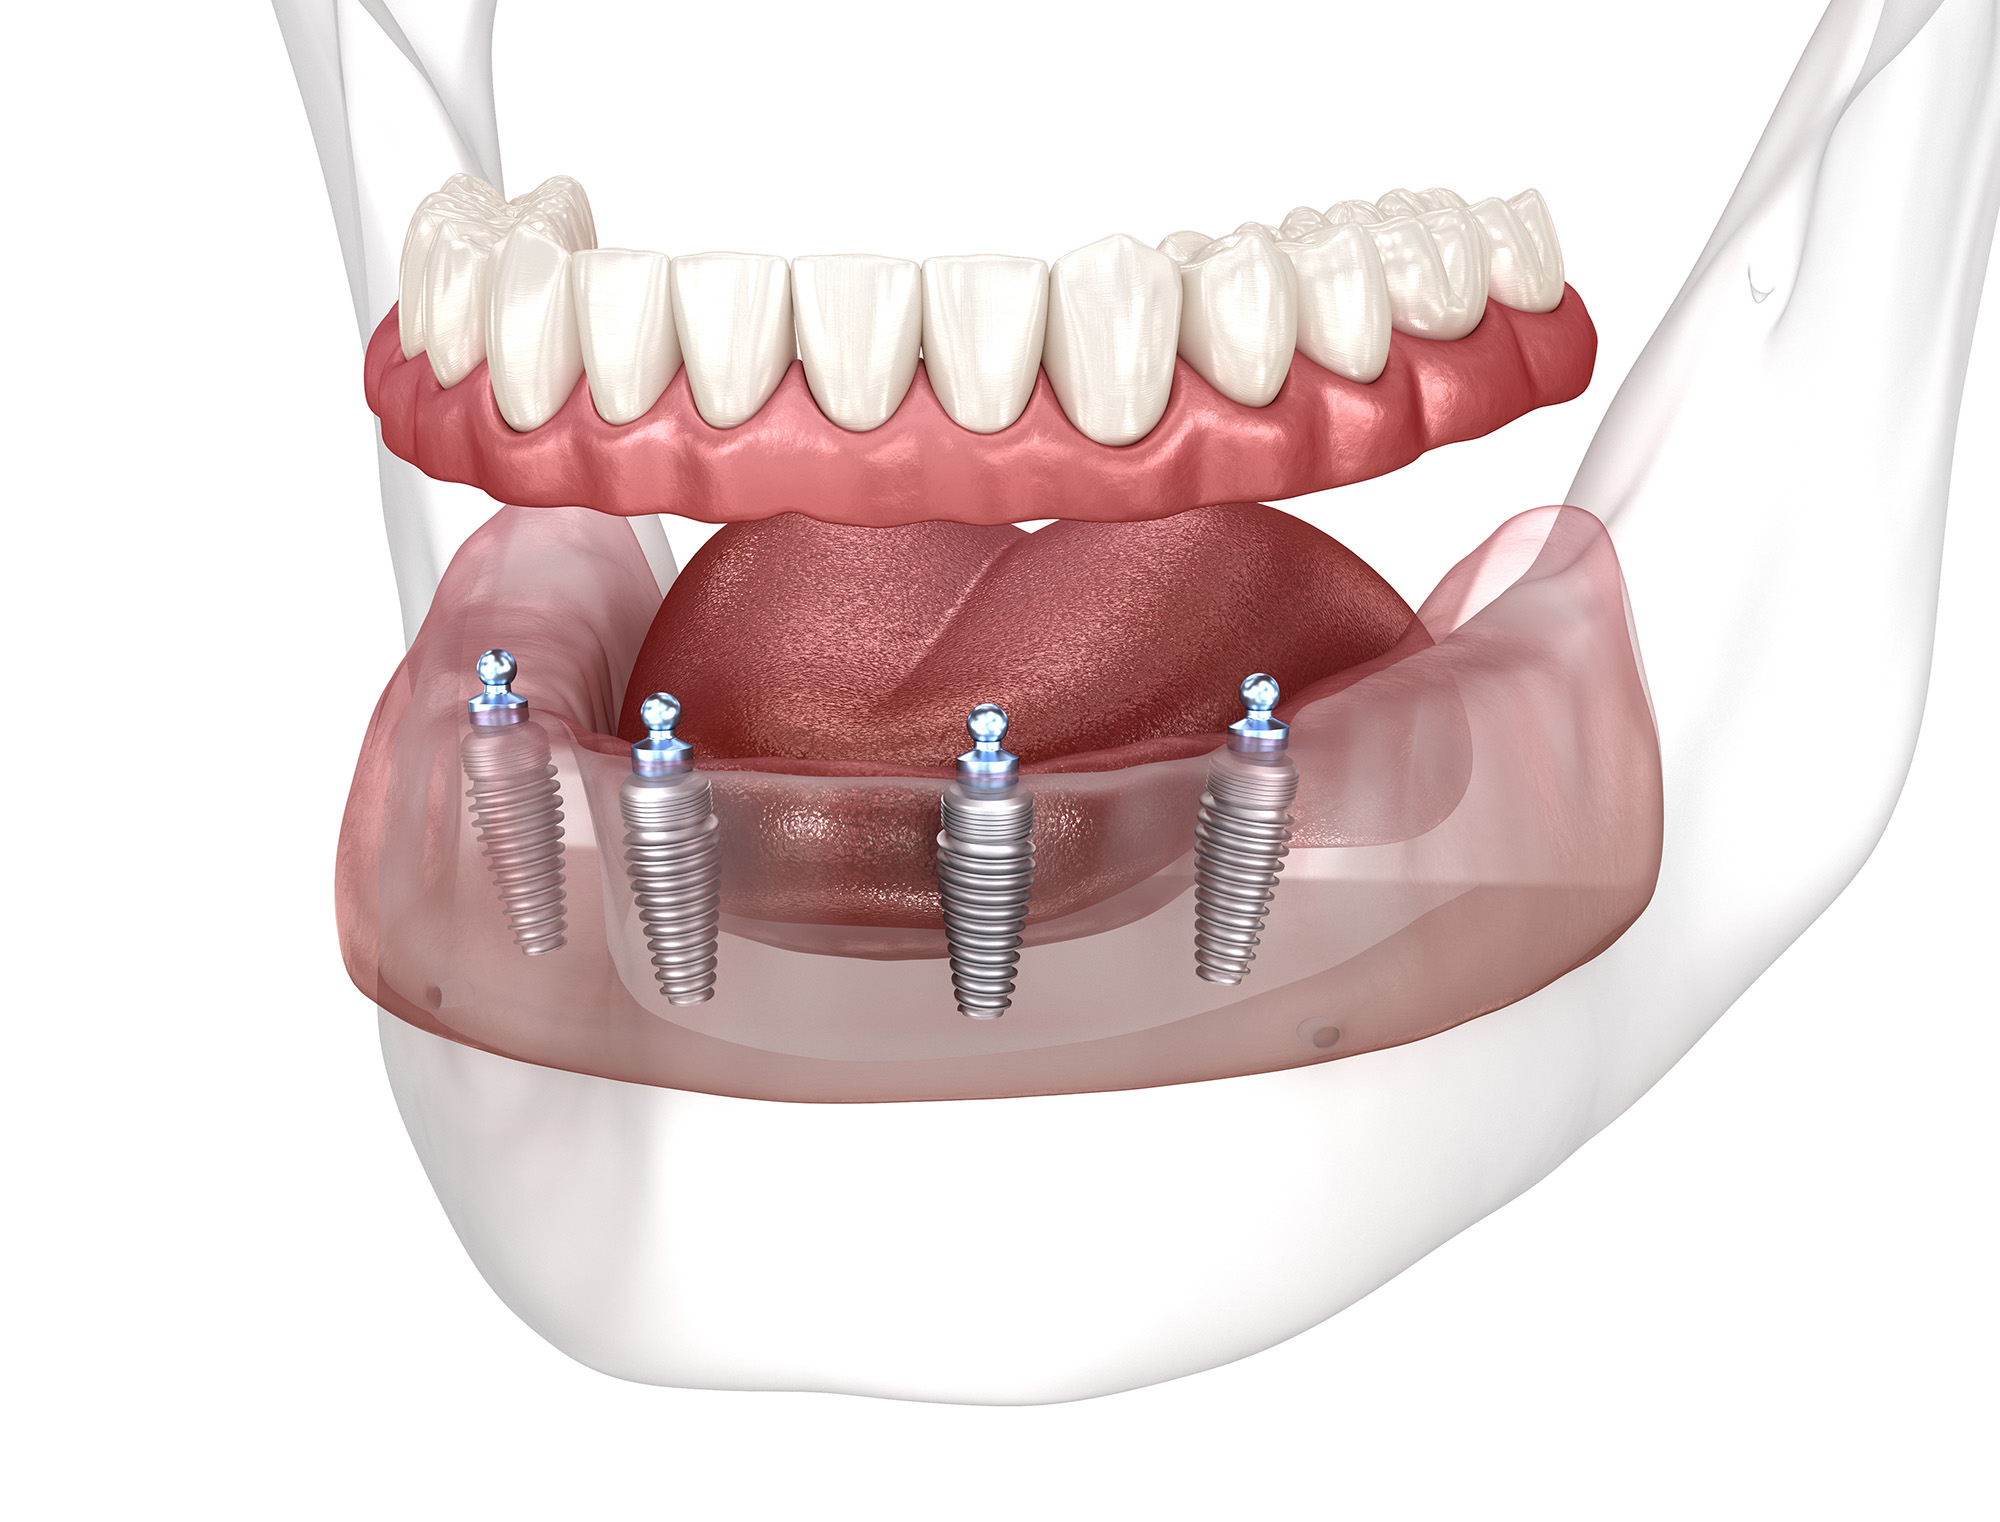 3D illustration of All-on-4 system supported by dental implants